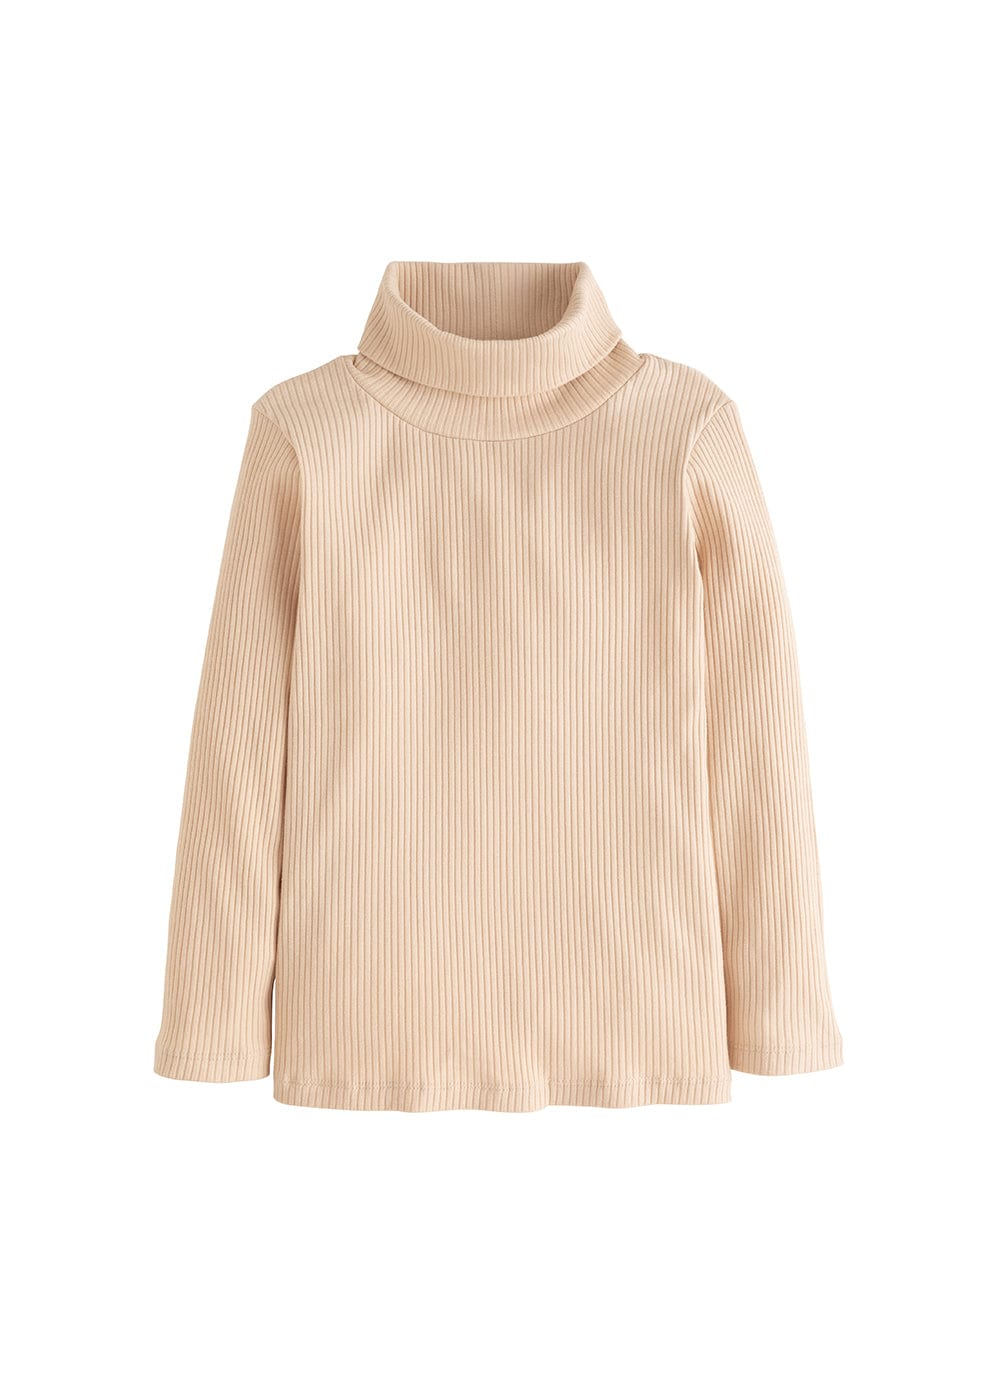 classic childrens clothing basic ribbed turtleneck in oatmeal 